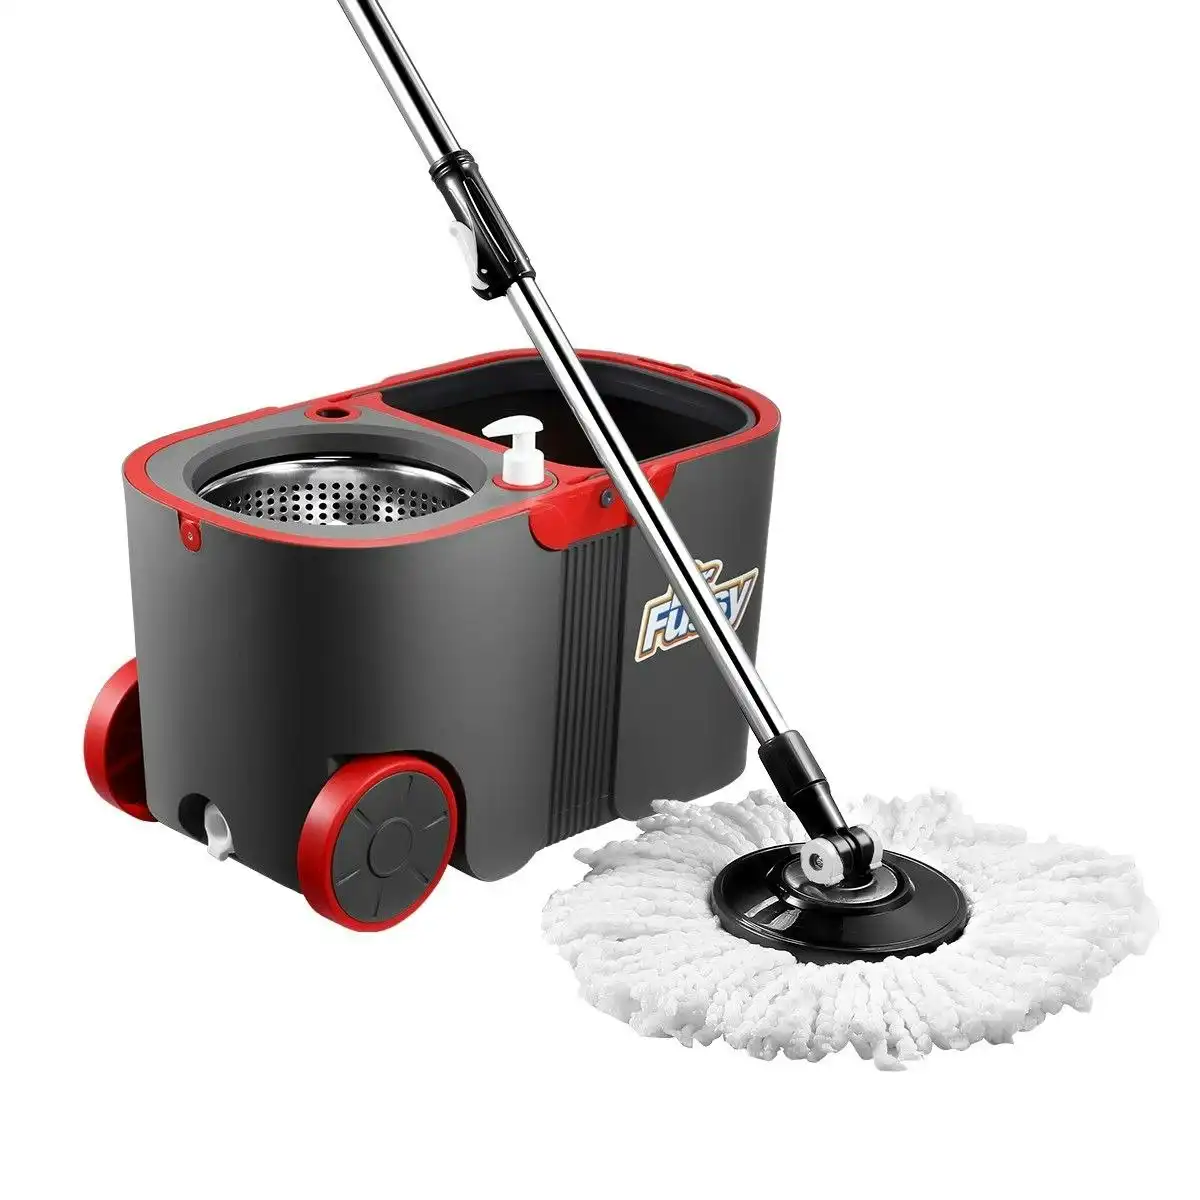 Dr FUSSY Spin Rotating Mop and Bucket Set  360 Degree with Wheels and 4 Microfibre Mop Heads